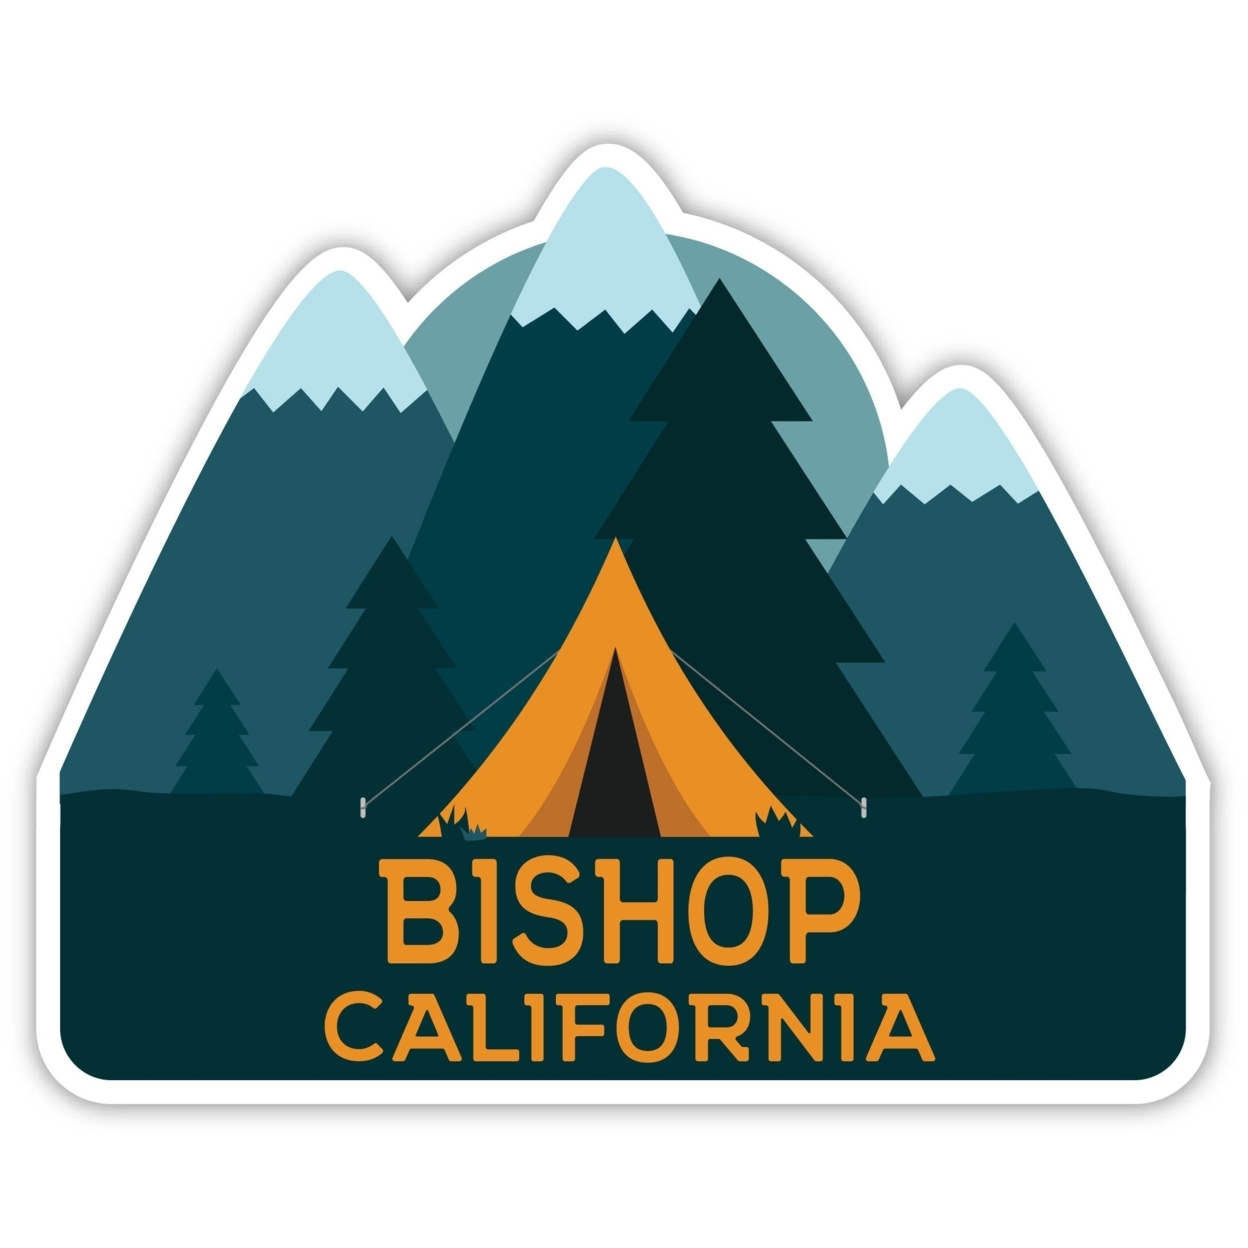 Bishop California Souvenir Decorative Stickers (Choose Theme And Size) - 4-Pack, 8-Inch, Bear